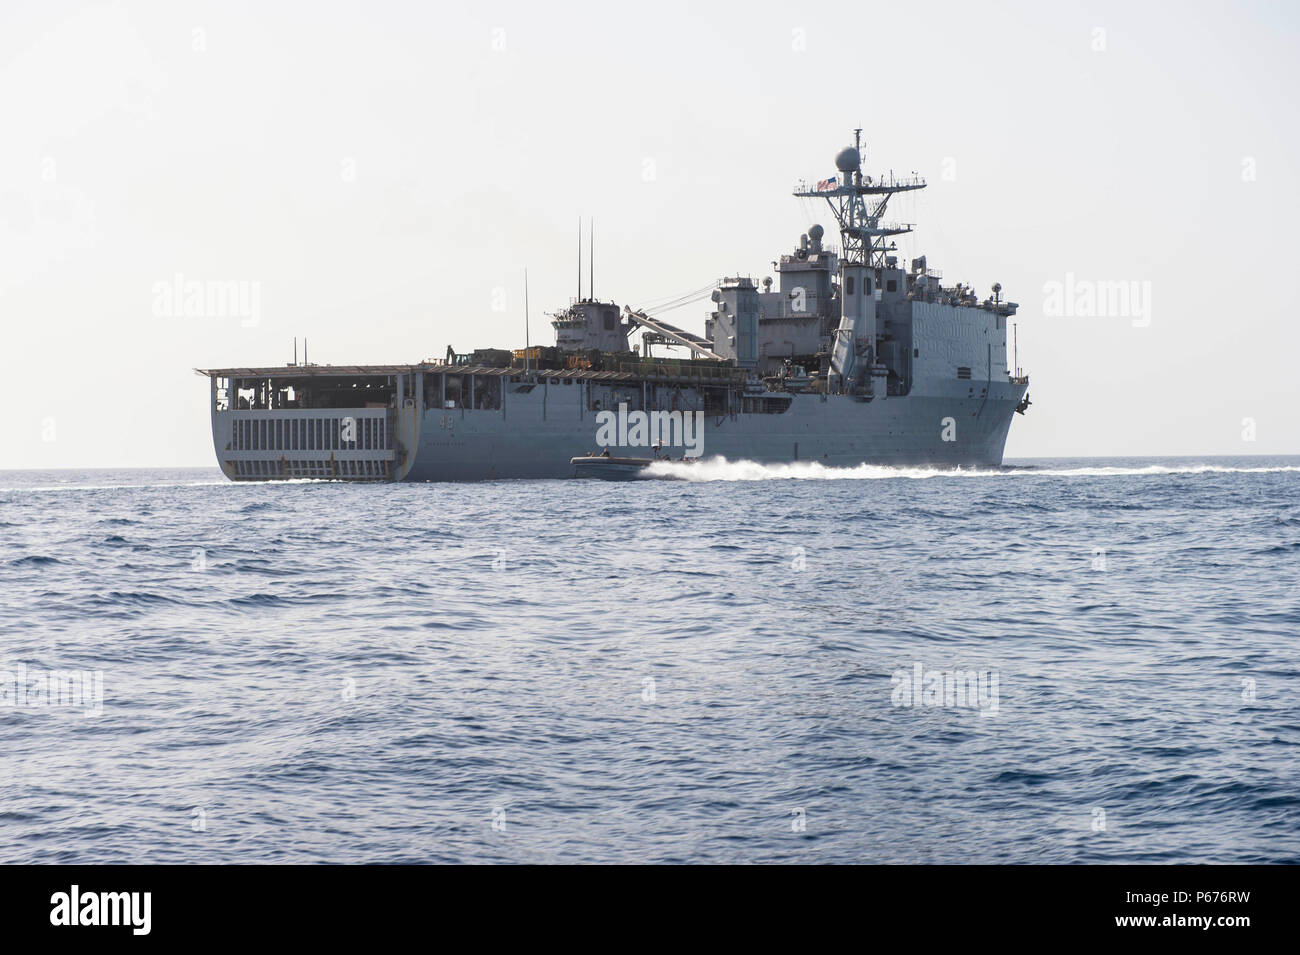 160516-N-VS214-172  RED SEA (May 16, 2016) An 11-meter rigid hull inflatable boat performs a horseshoe maneuver around the dock landing ship USS Harpers Ferry (LSD 49) during a small boat training exercise. The crew of Harpers Ferry is part of about 3,000 U.S. military personnel – representing USCENTCOM headquarters and its components – who will participate in this year’s bilateral exercise, exercise Eager Lion 16, with the Jordan Armed Forces. (U.S. Navy photo by Mass Communication Specialist 3rd Class Zachary Eshleman/Released) Stock Photo